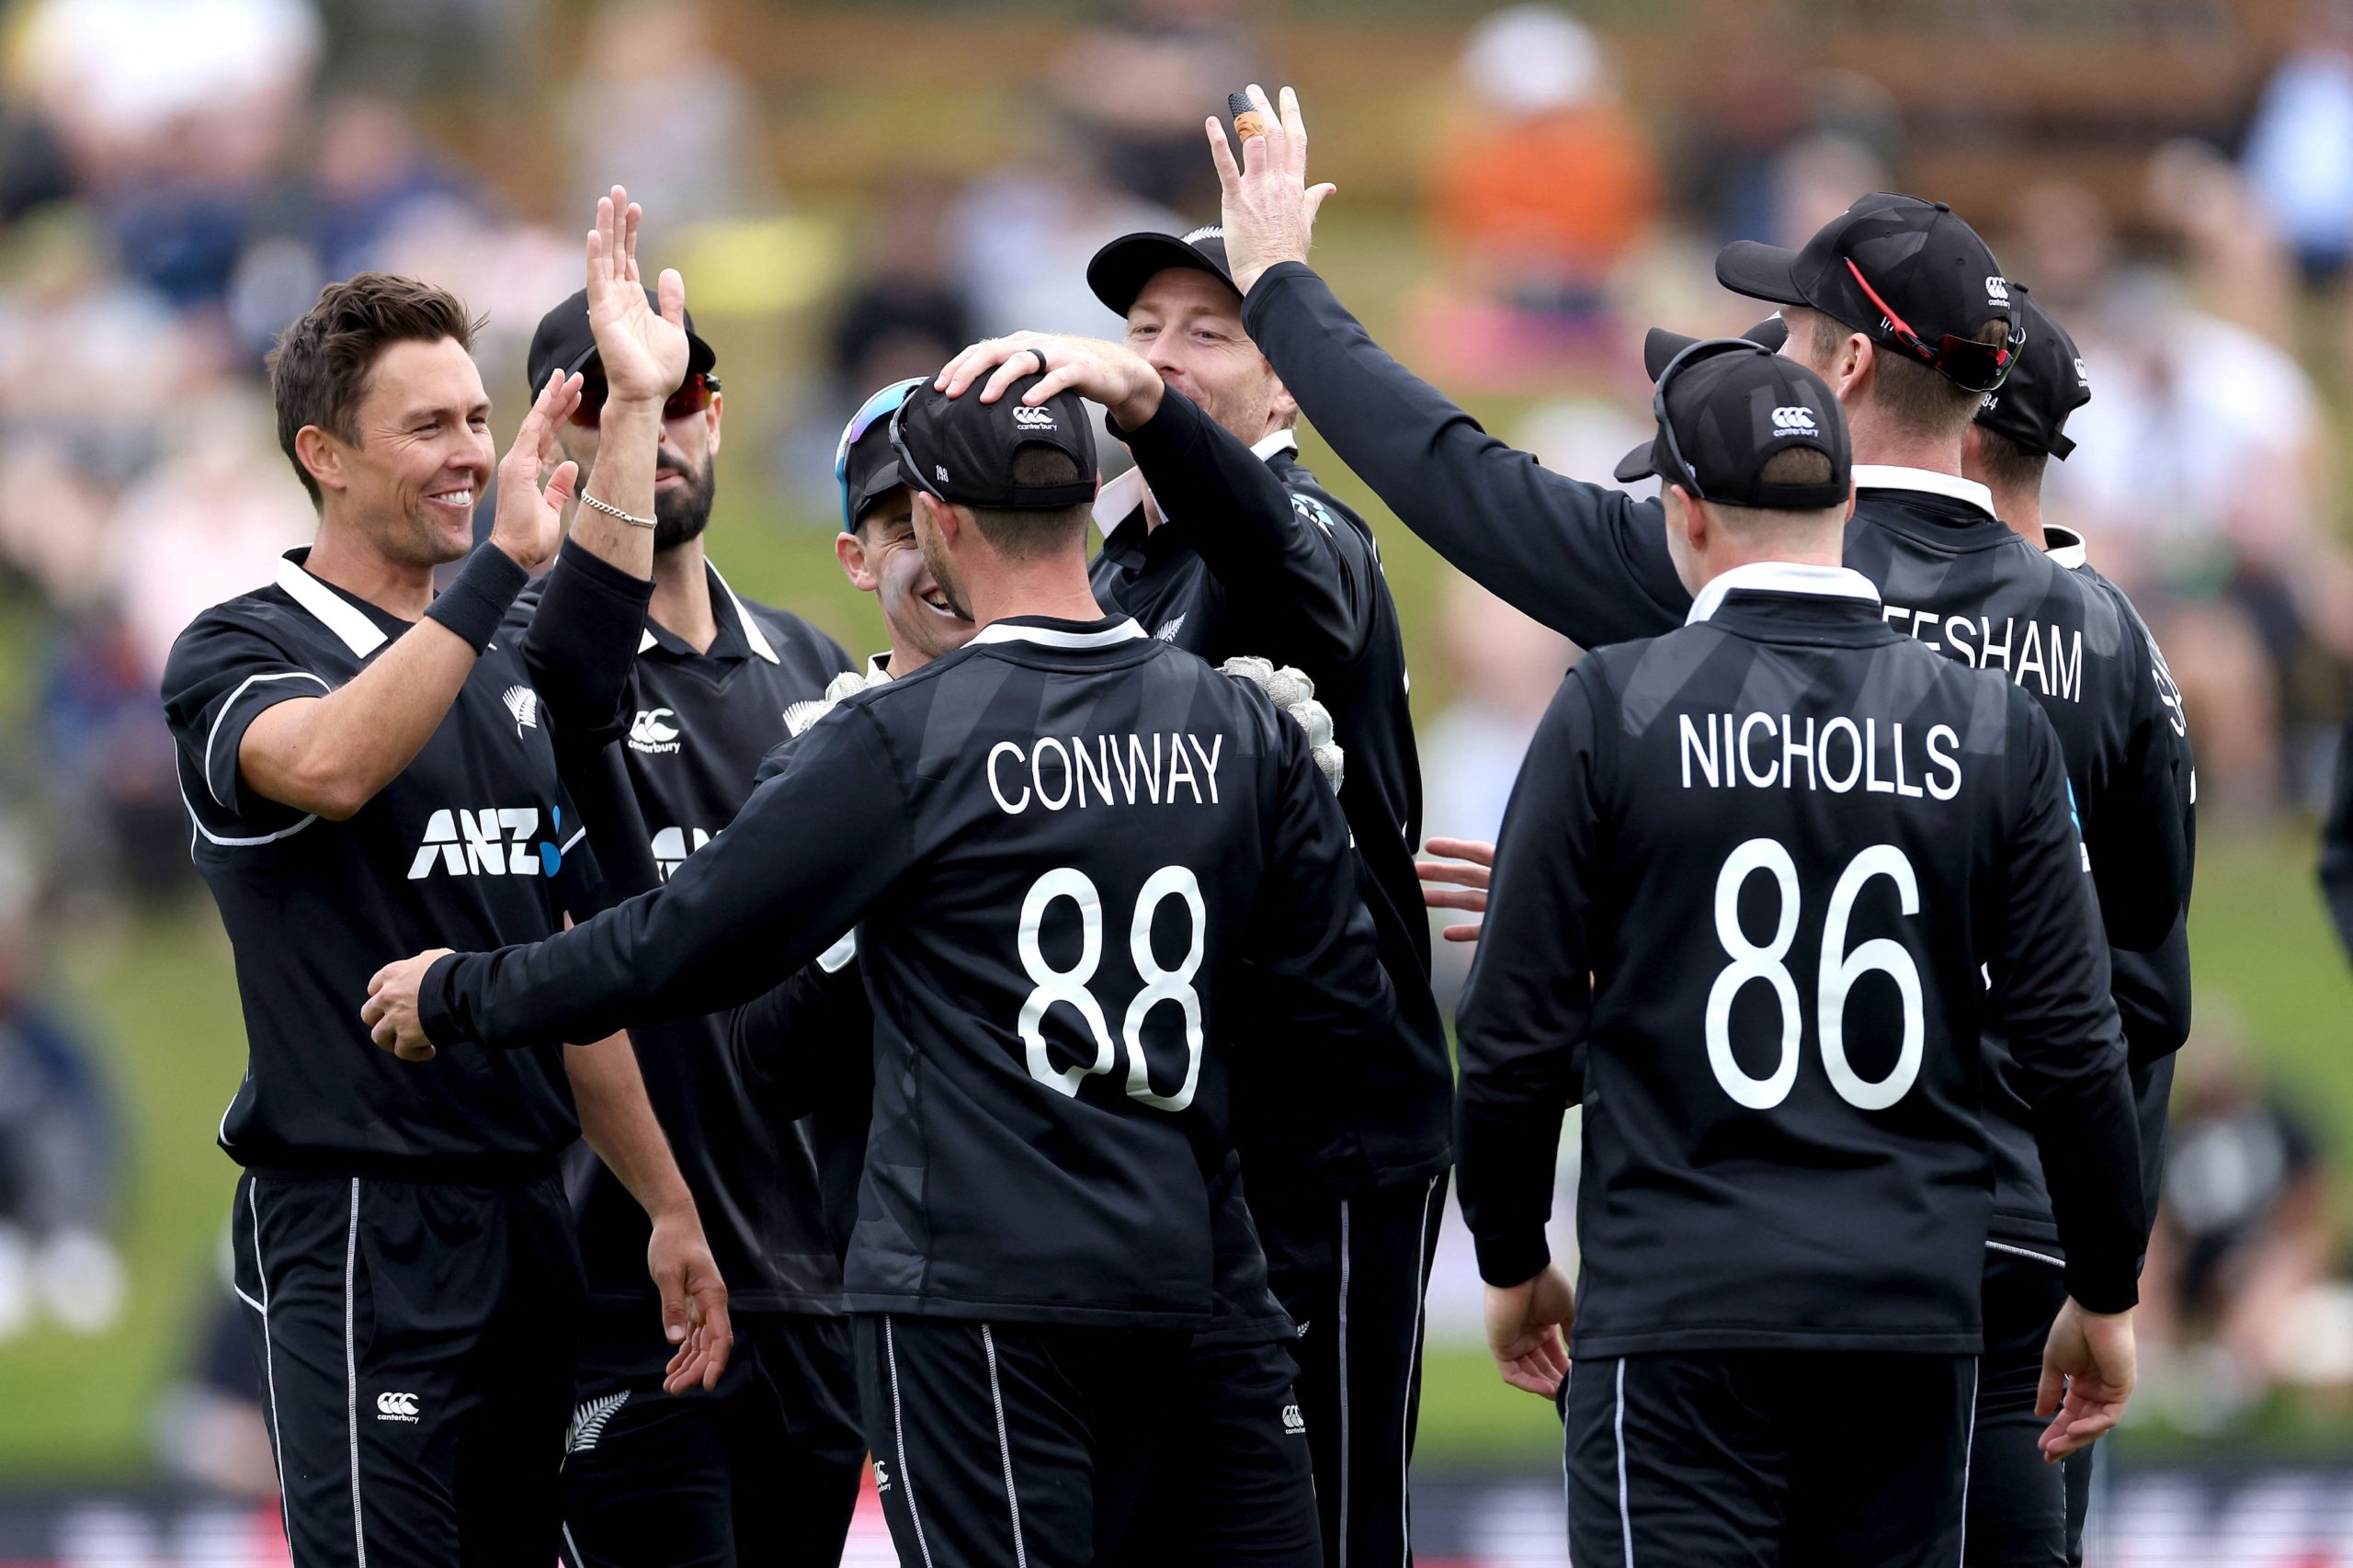 New Zealand thrash Bangladesh by 8 wickets in 1st ODI, Trent Boult stars with 4 wickets; Tom Latham